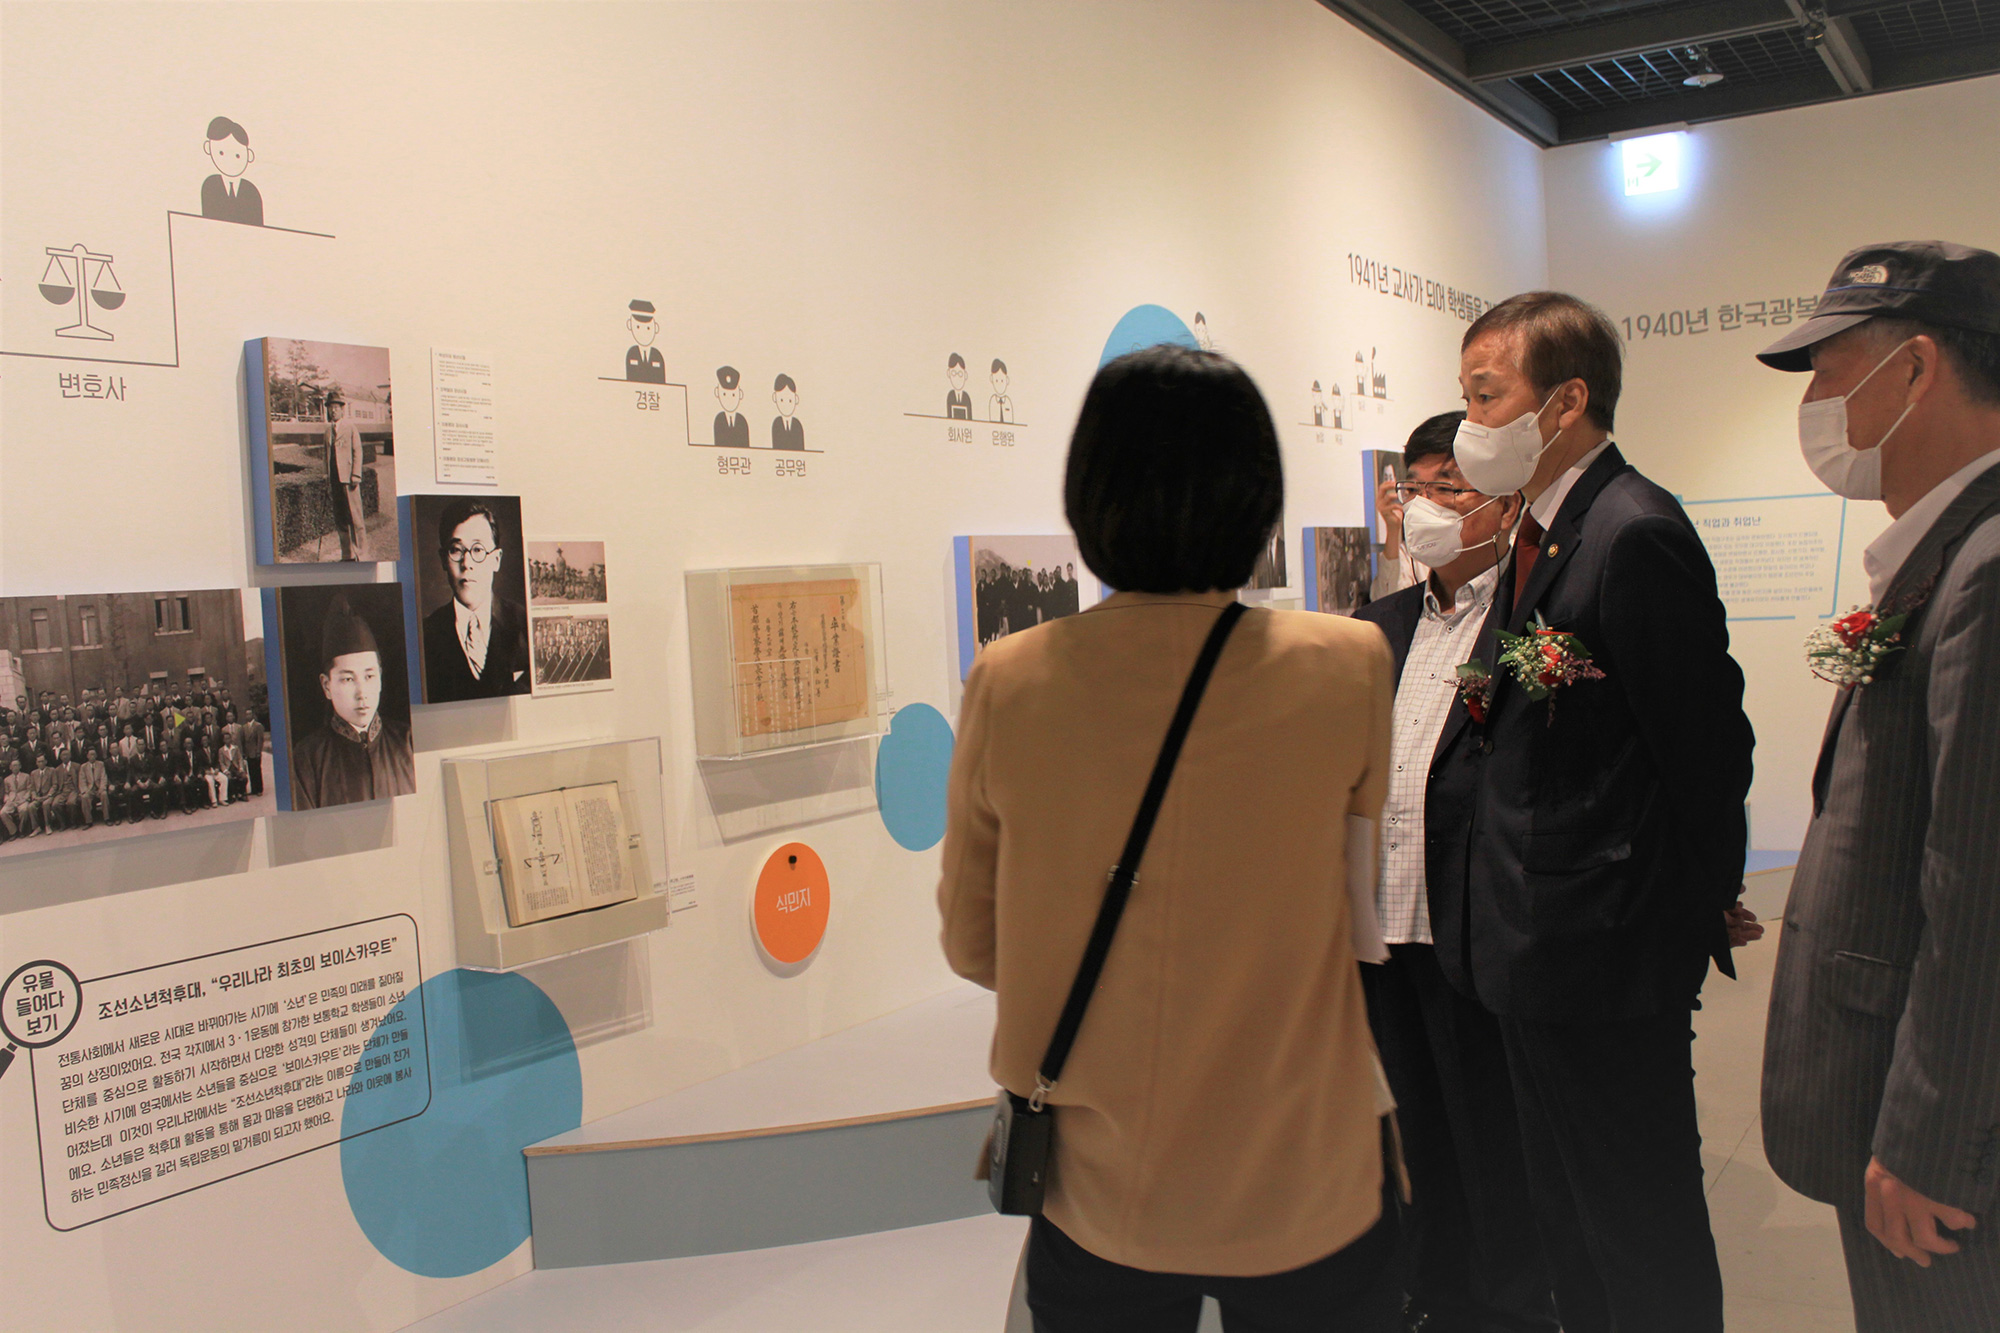 National Memorial for Abductees during the Korean War launches special exhibit